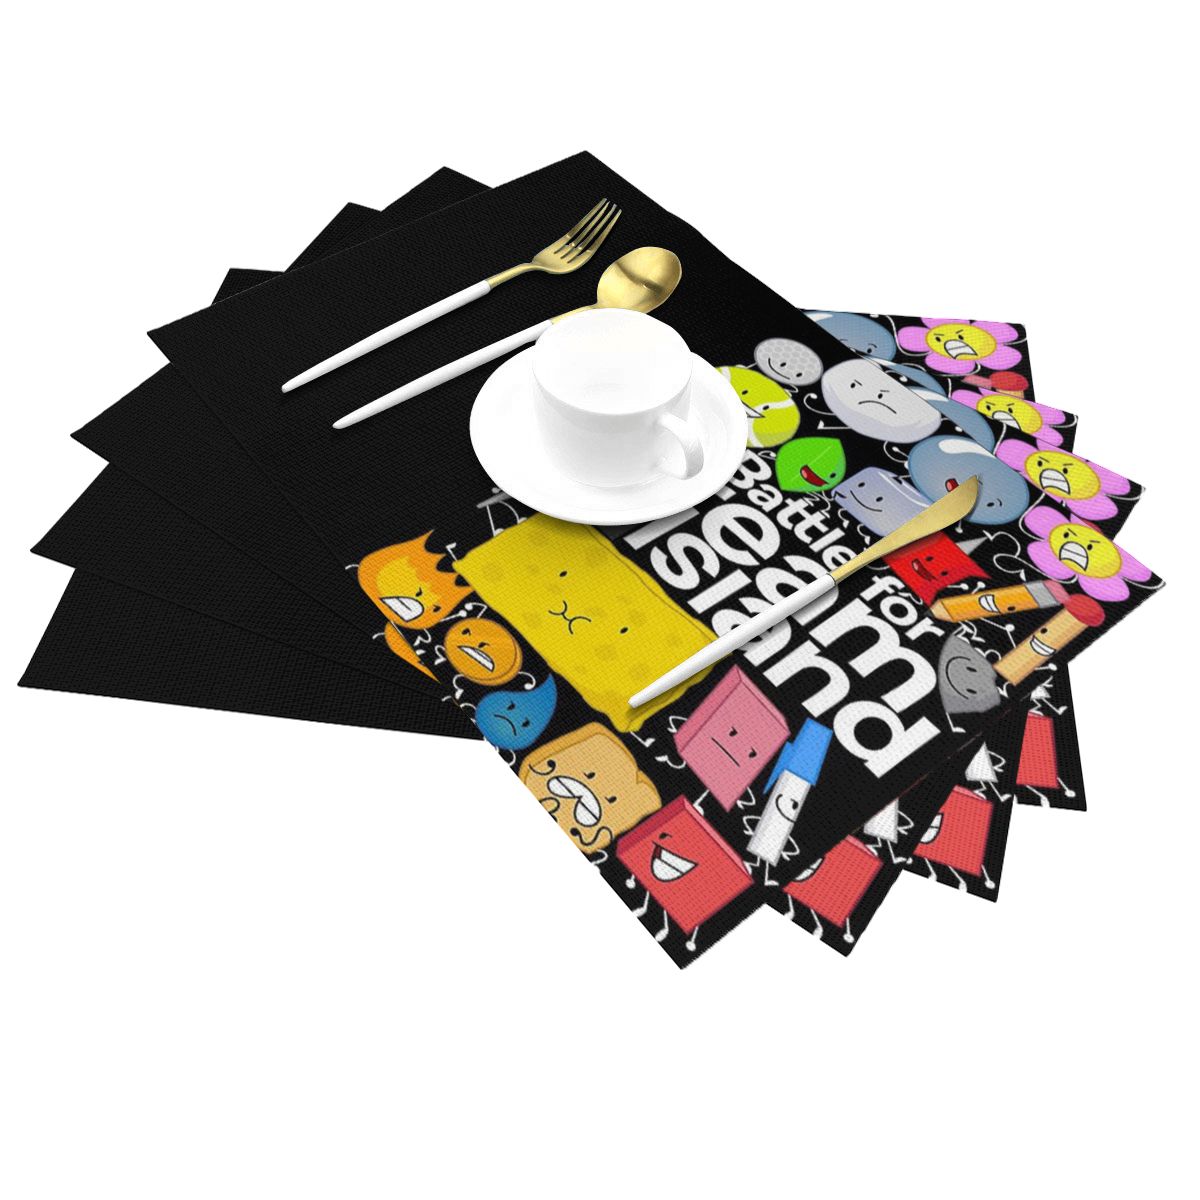 BFDI Poster Black Placemat Beautiful Match with Dark Wood Table Suitable for Barbecue Washable 1 - BFDI Plush